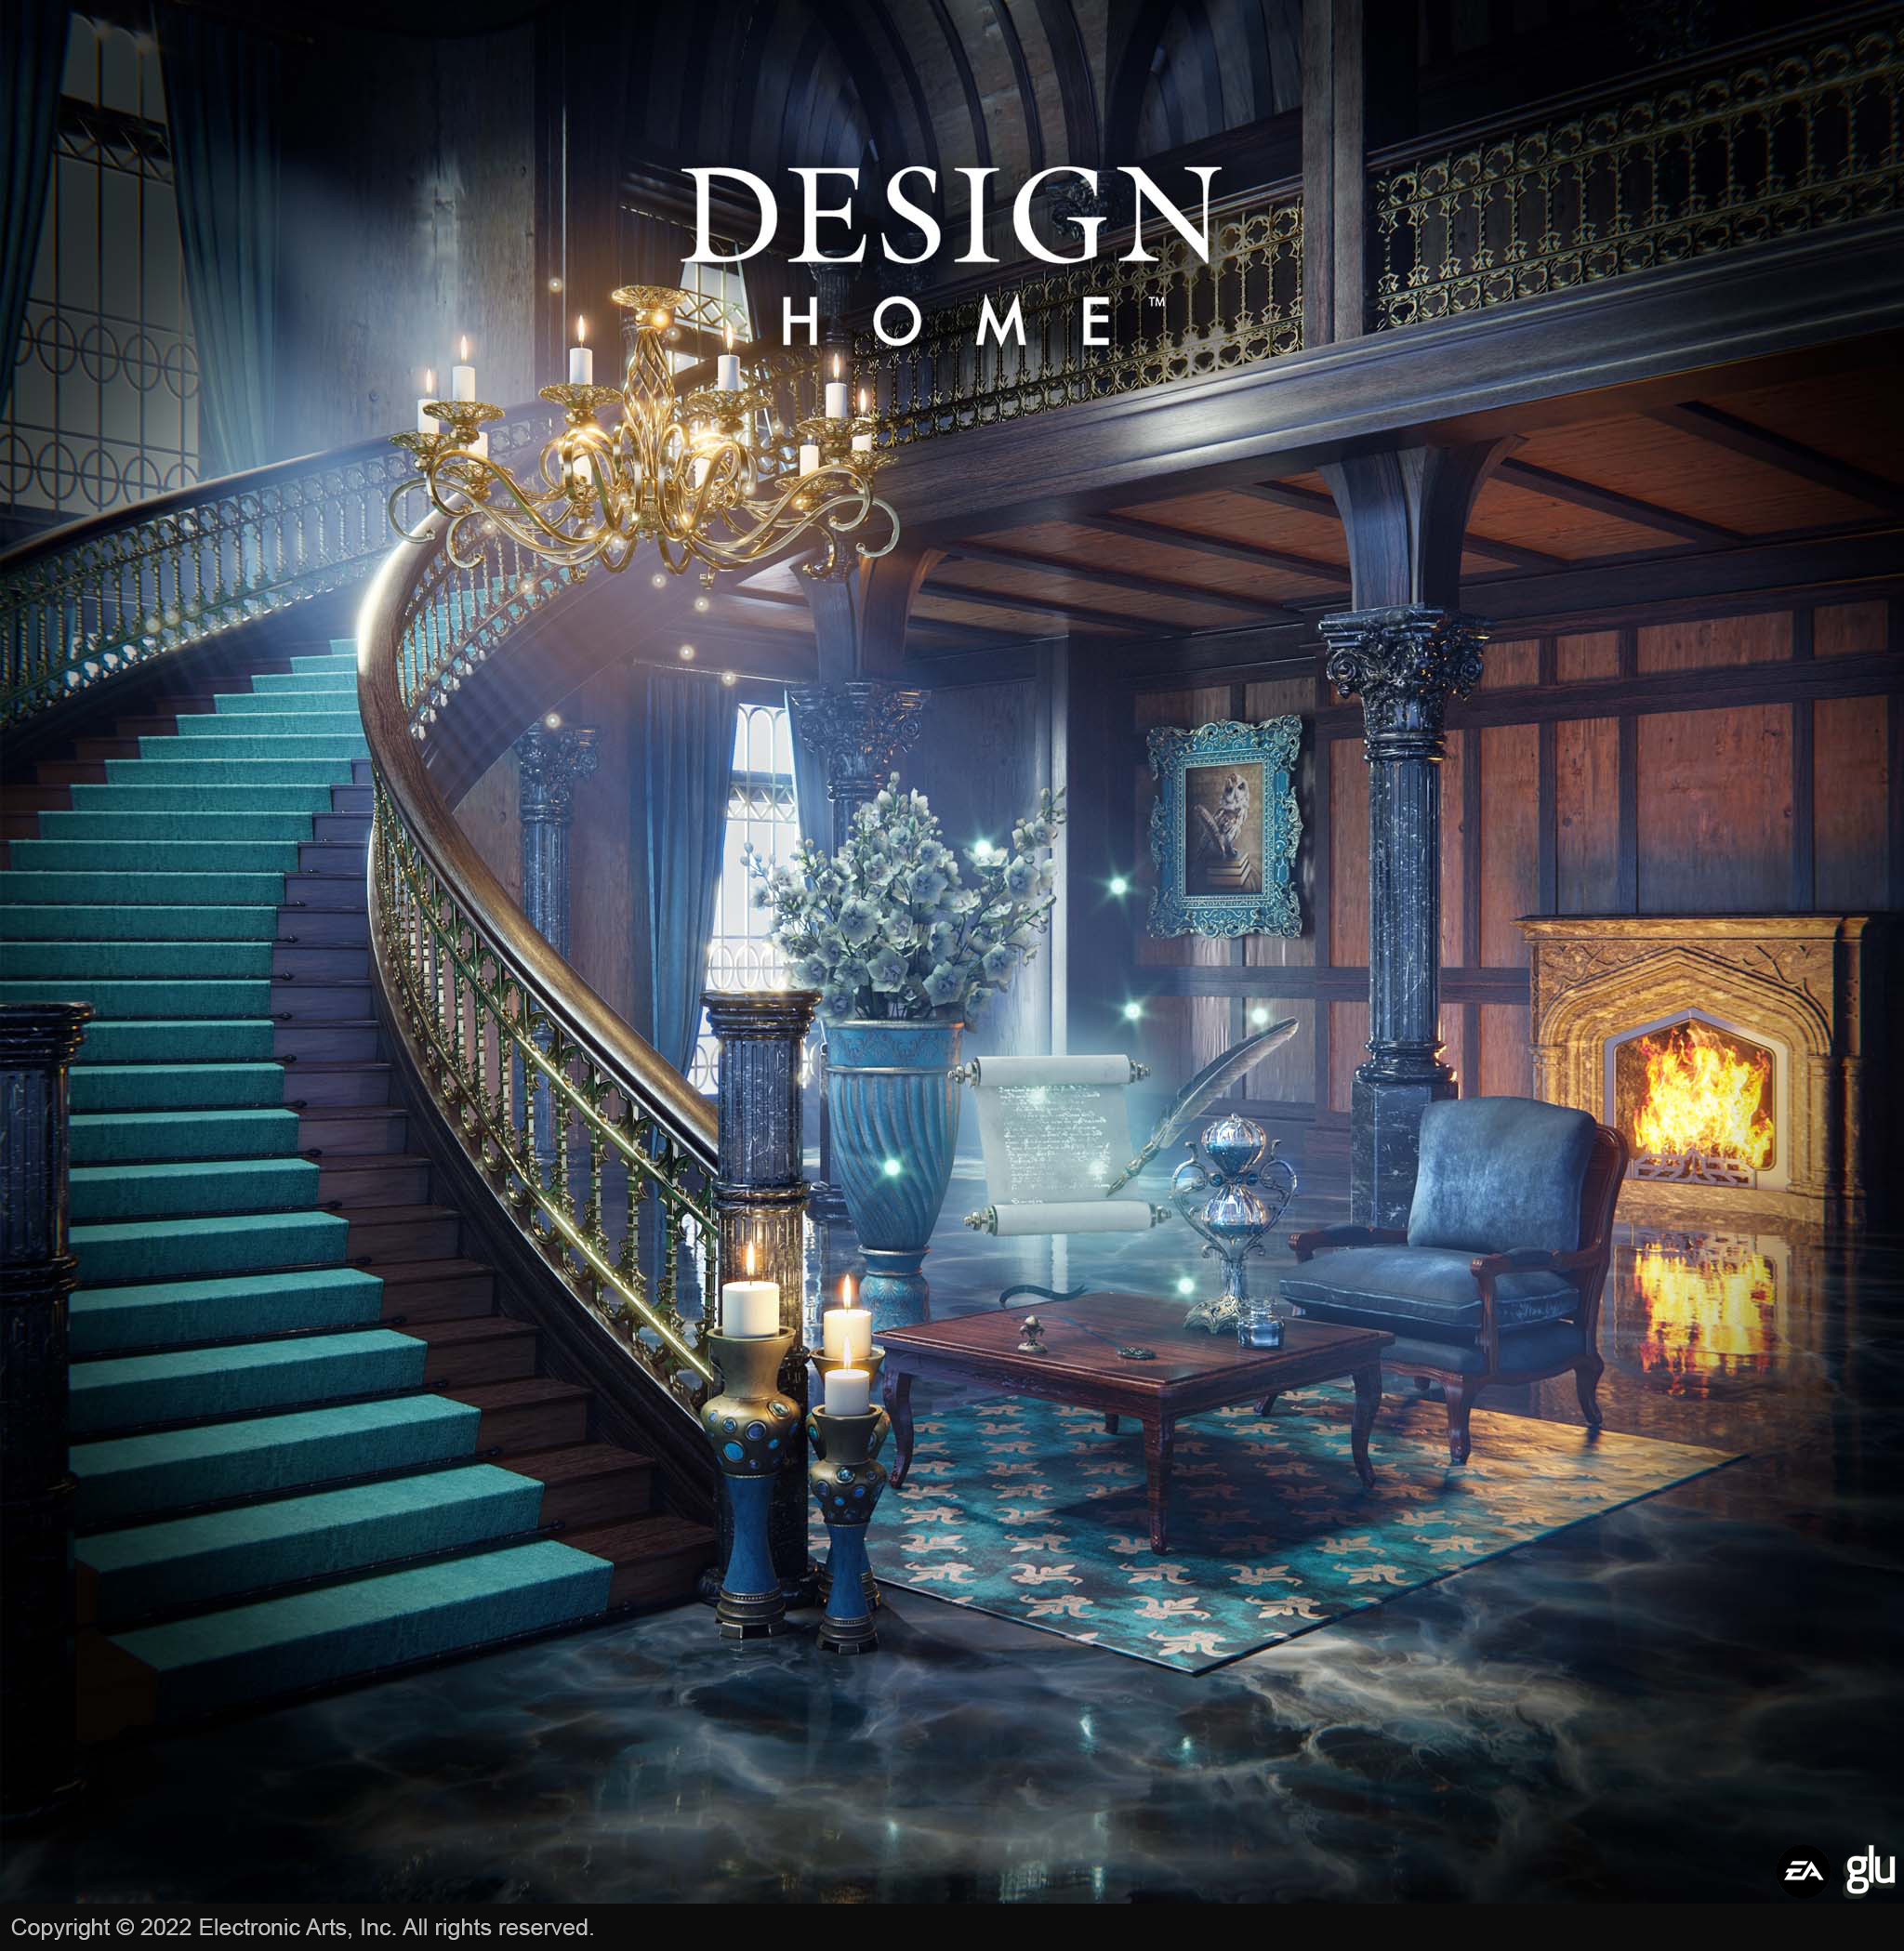 Design Home loading screens with the assets I contributed.
The background environments are created and rendered by German Rodriguez